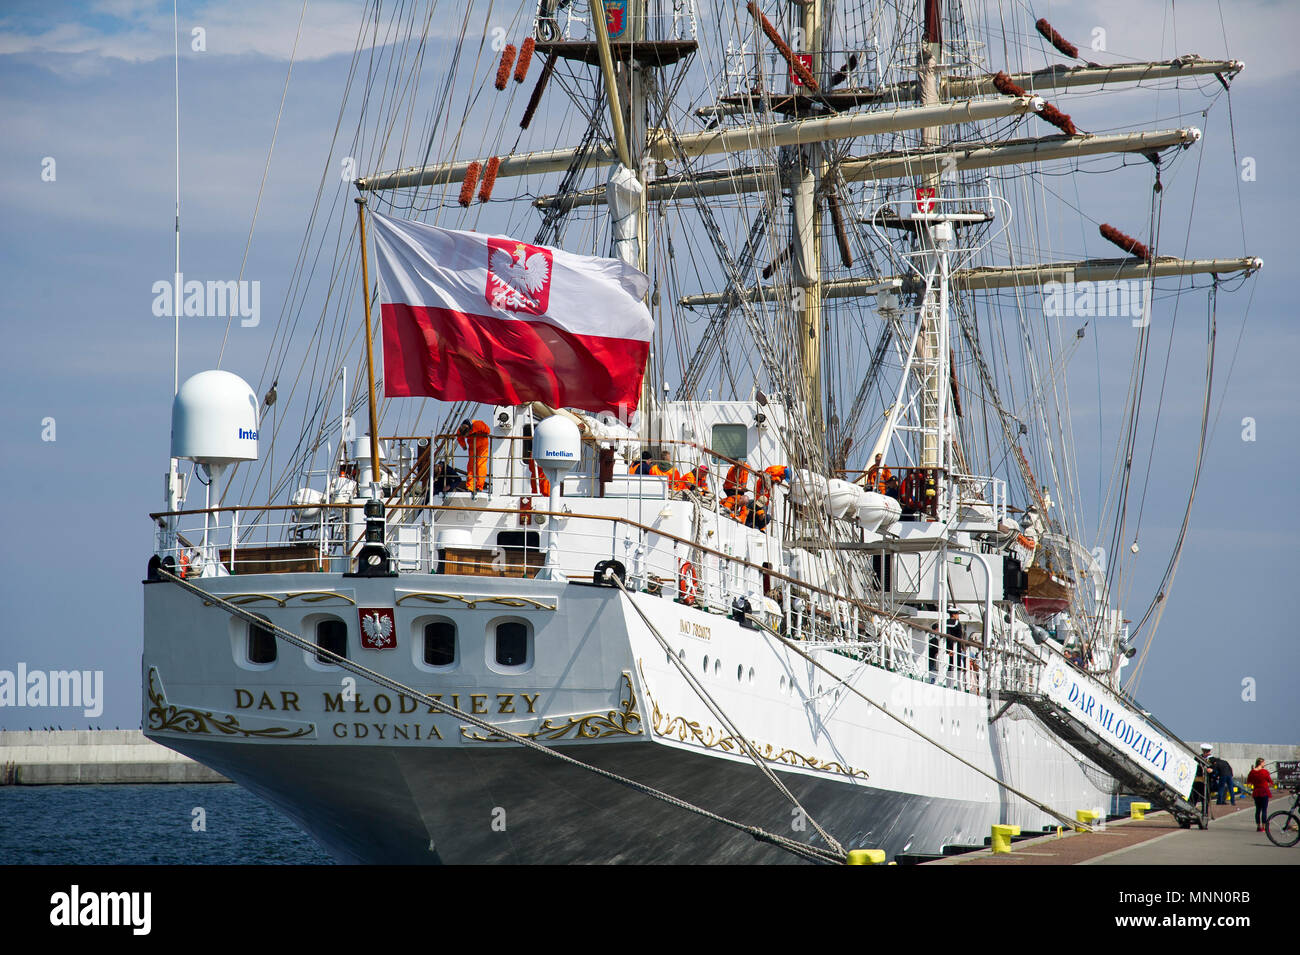 Dar Mlodziezy (Gift of the Youth), Polish full-rigged sailing ship of Gdynia Maritime University, during preparation to The Independence Sail to make  Stock Photo